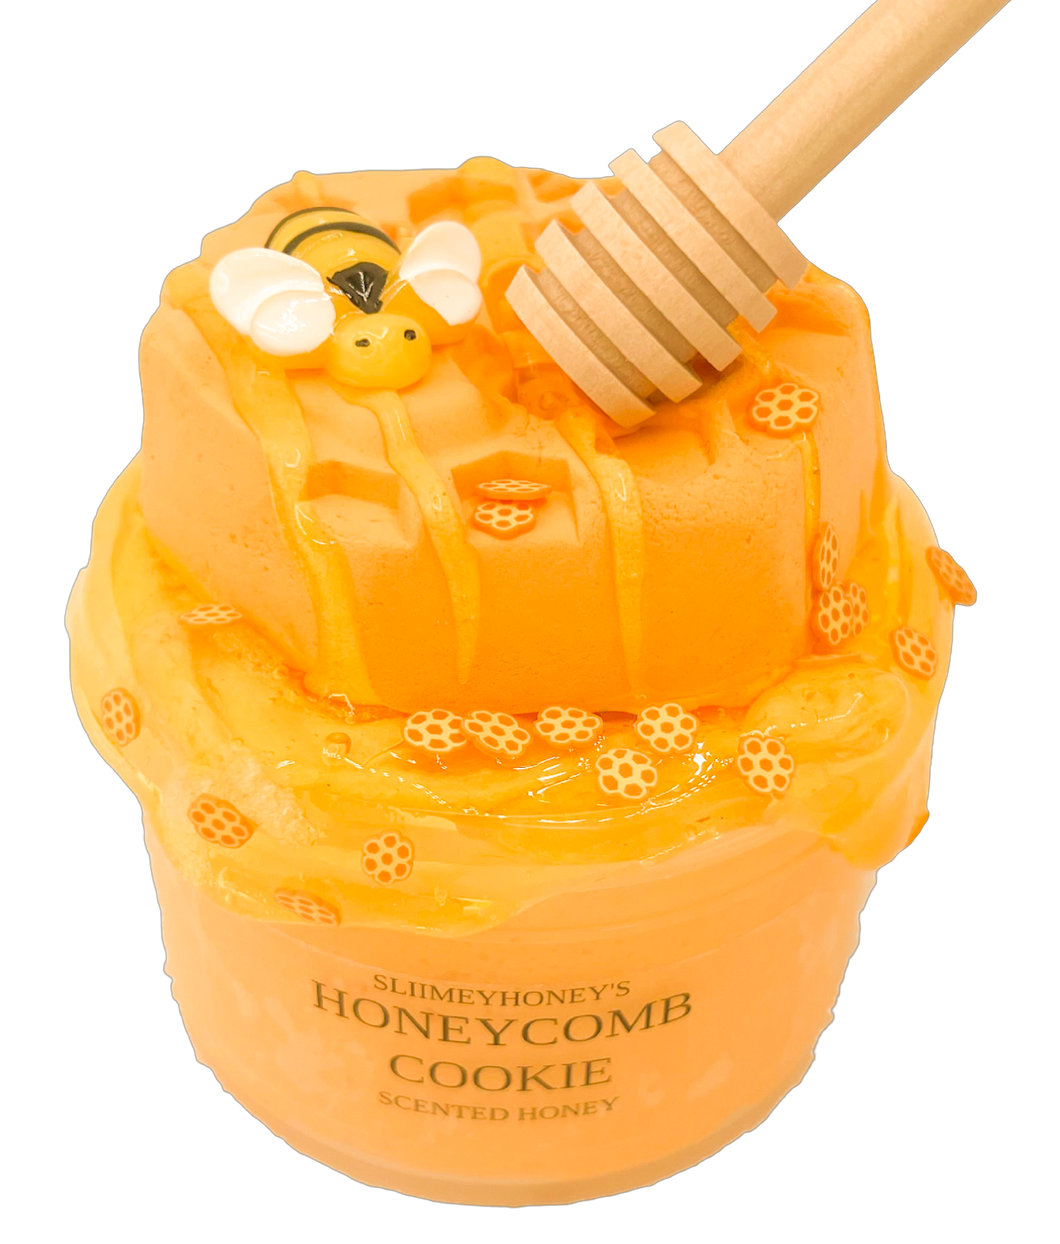 Honeycomb for your honey - Clouds for Buttercream